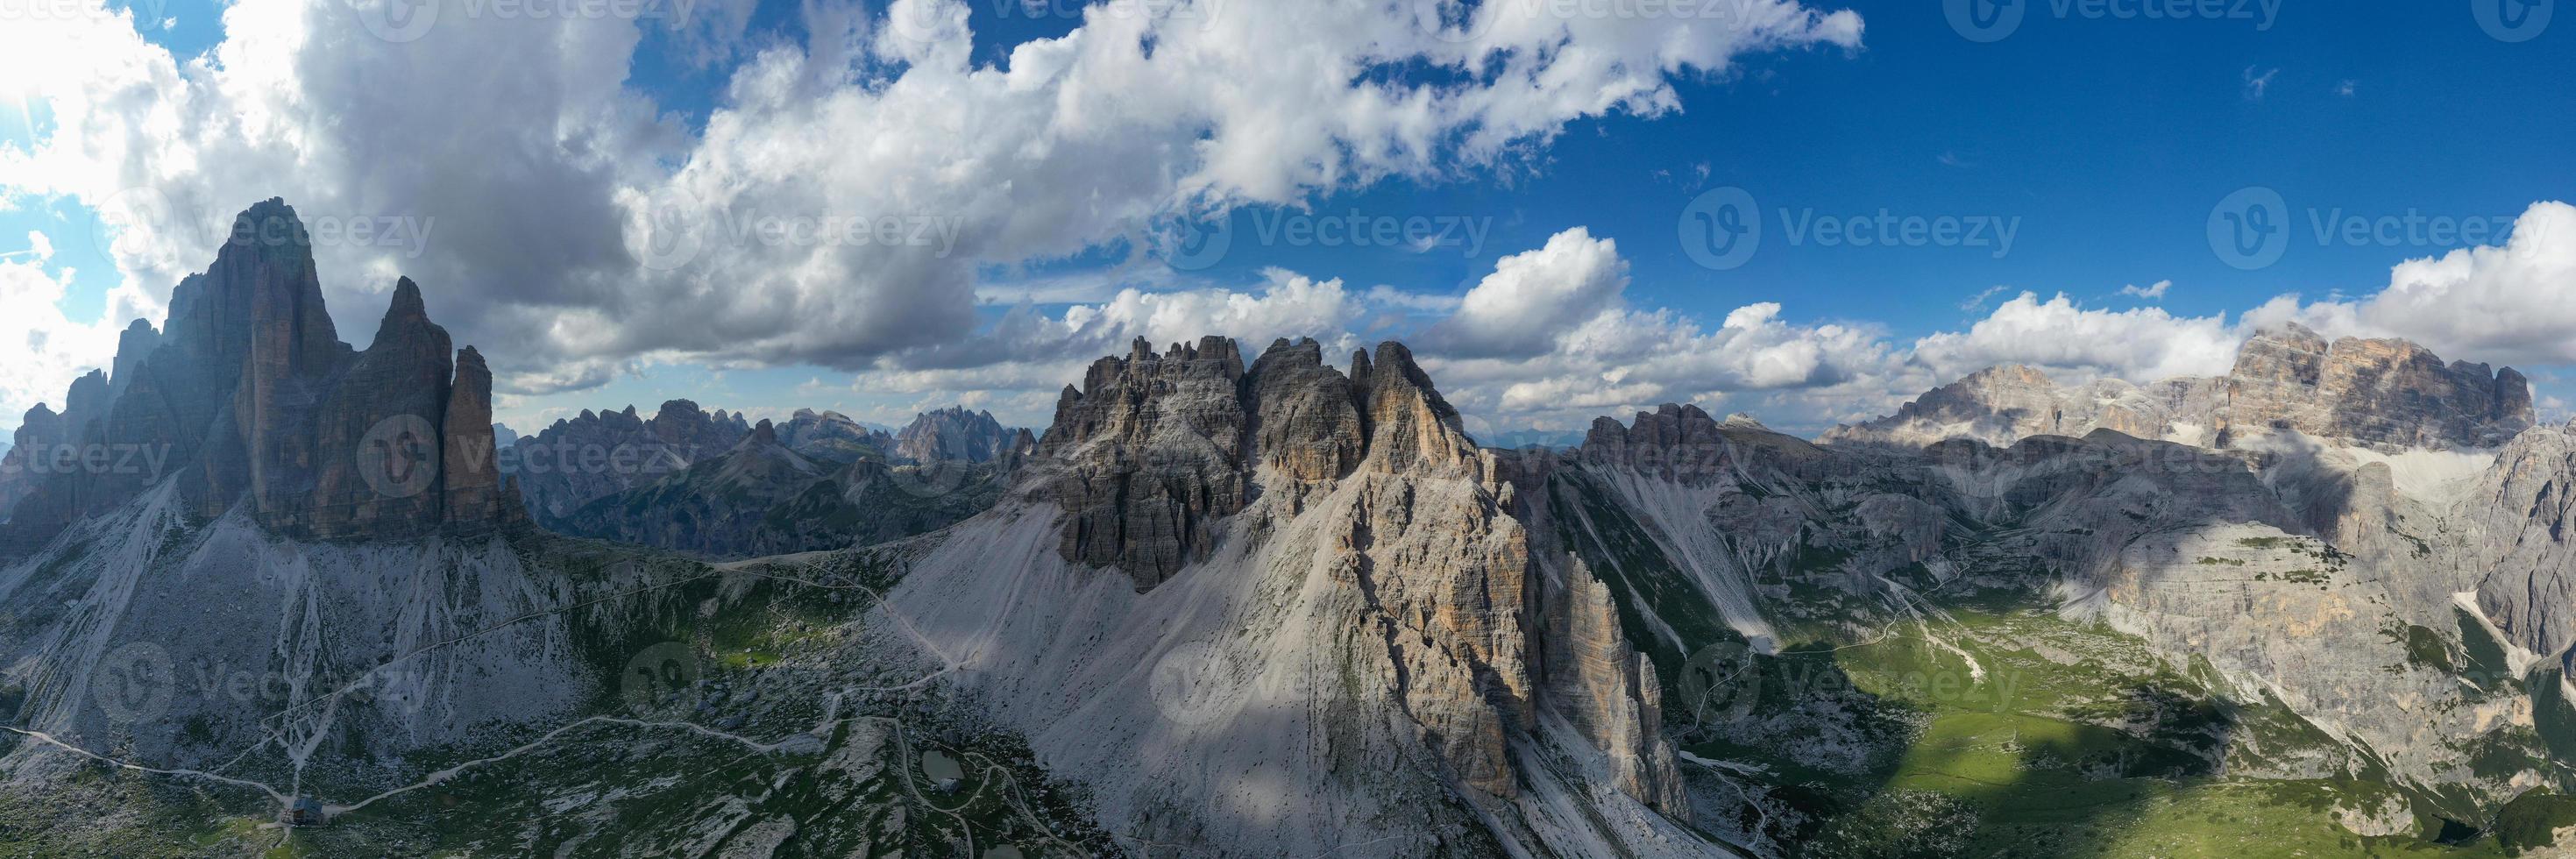 Beautiful sunny day in Dolomites mountains. View on Tre Cime di Lavaredo - three famous mountain peaks that resemble chimneys. photo